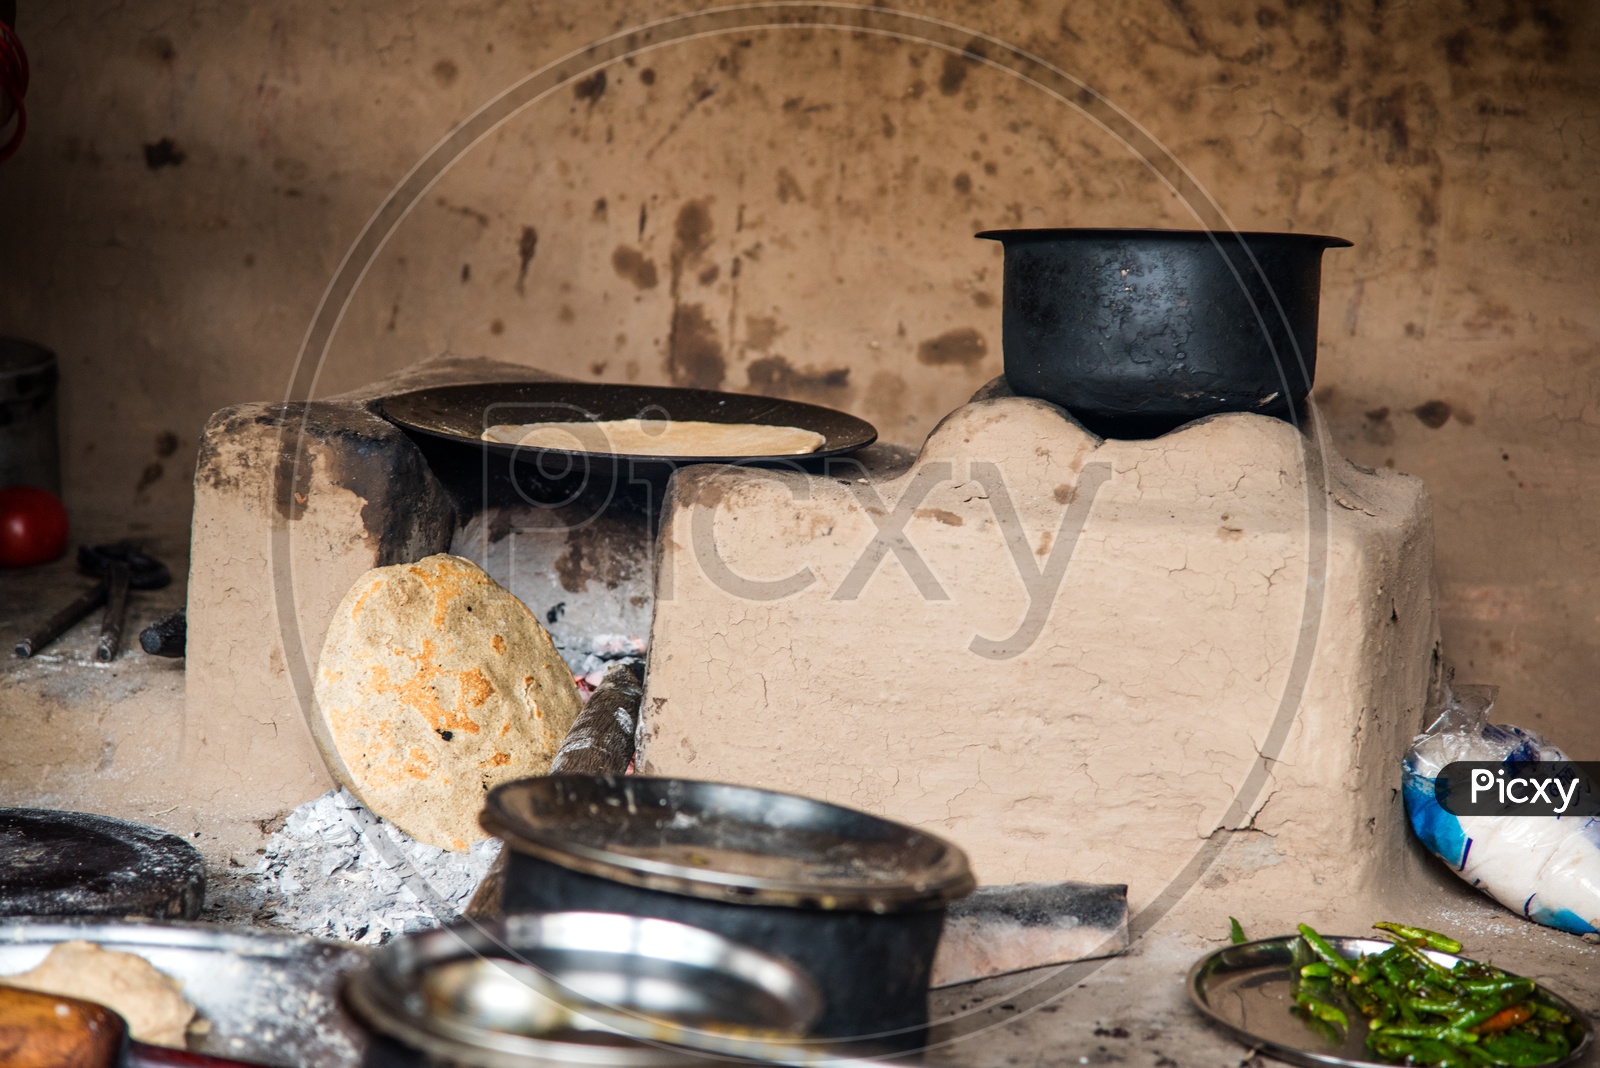 Cooking Food  in an Traditional  Earthen Stove  in an  Indian  Rural Village Kitchens